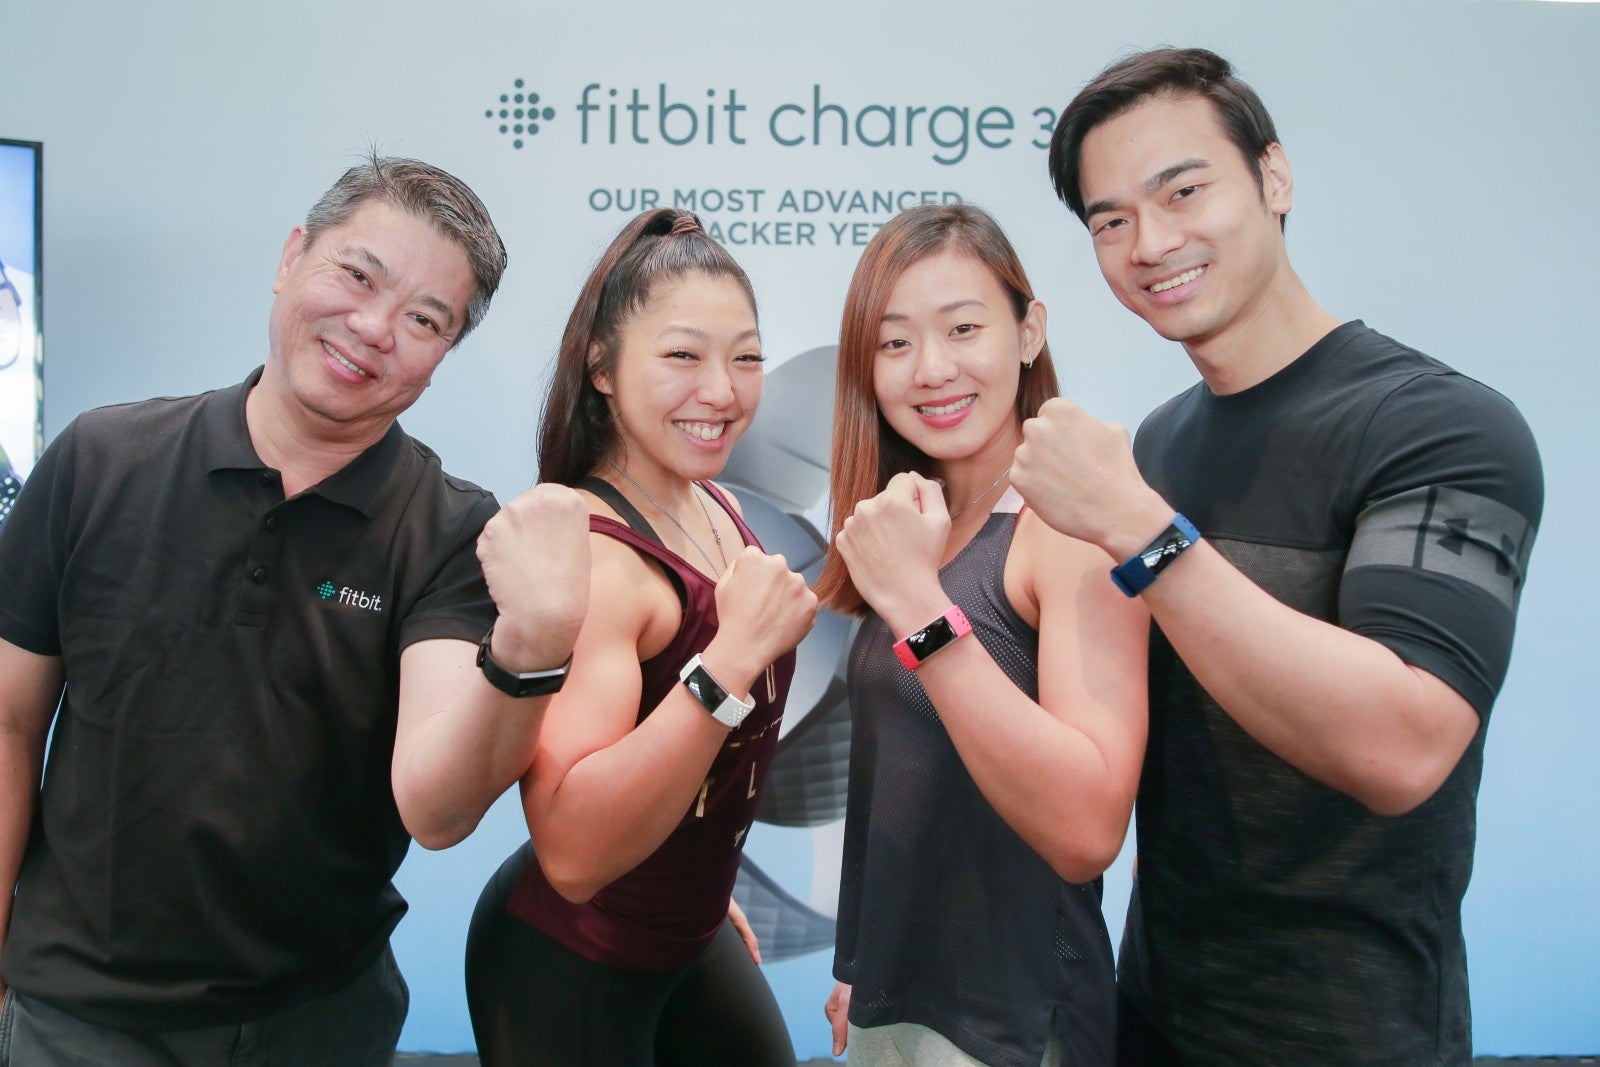 7 Things You Need to Know About This New Fitness Tracker That'll Help You Be Healthier - WORLD OF BUZZ